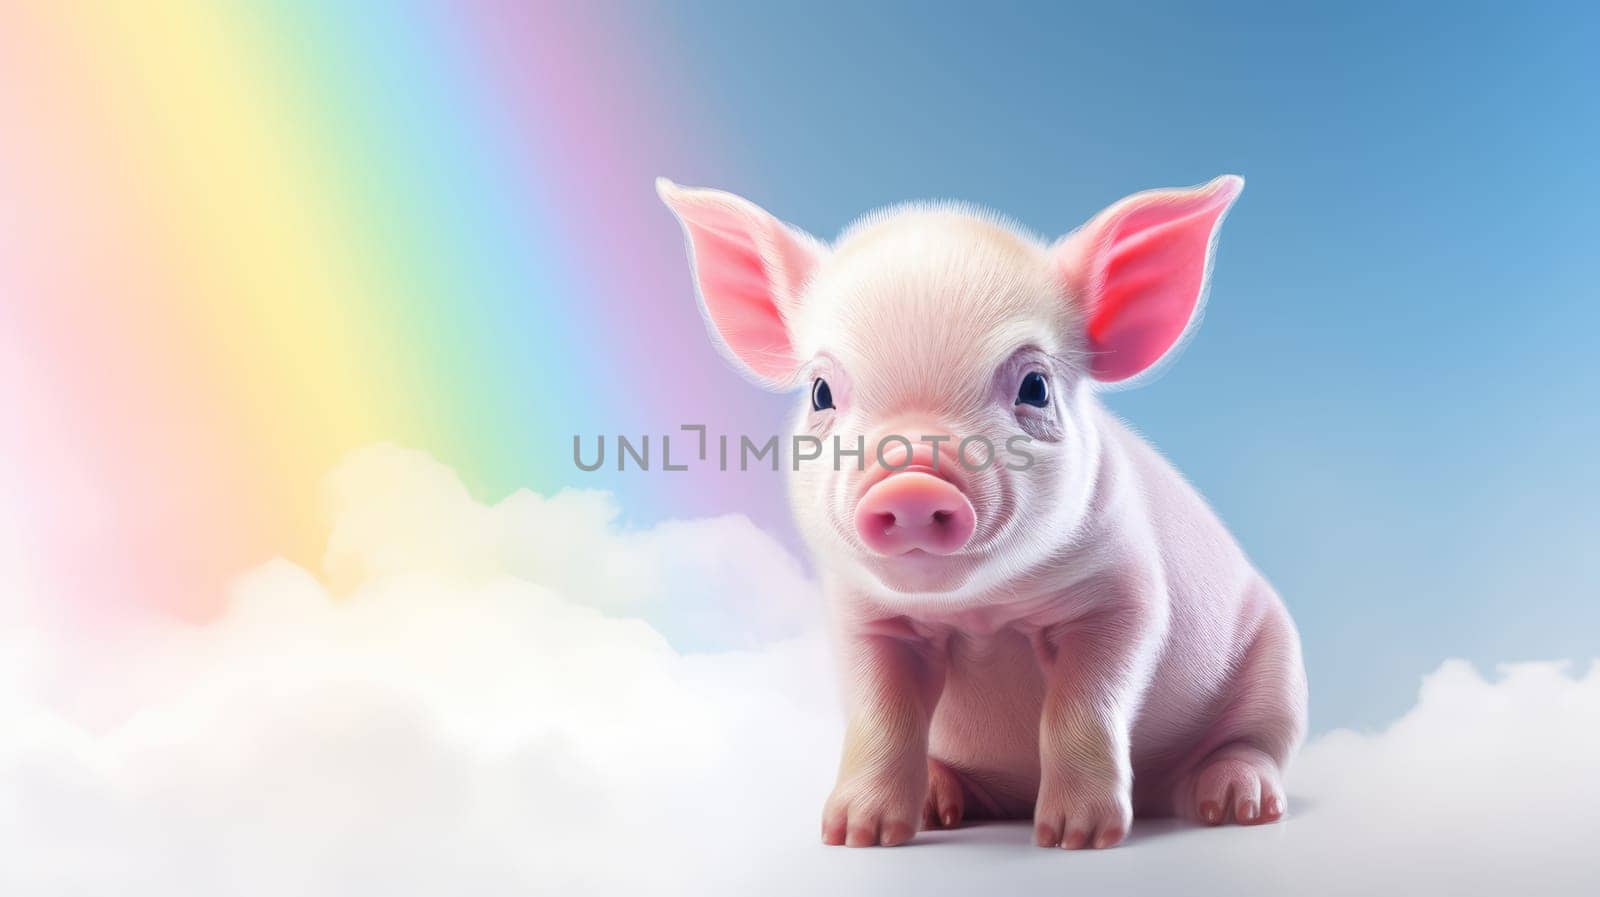 This cute baby piglet is perfect for marketing and branding. Its innocence and charm will captivate your audience, evoking warmth and joy. Add whimsy to your project with this delightful image.